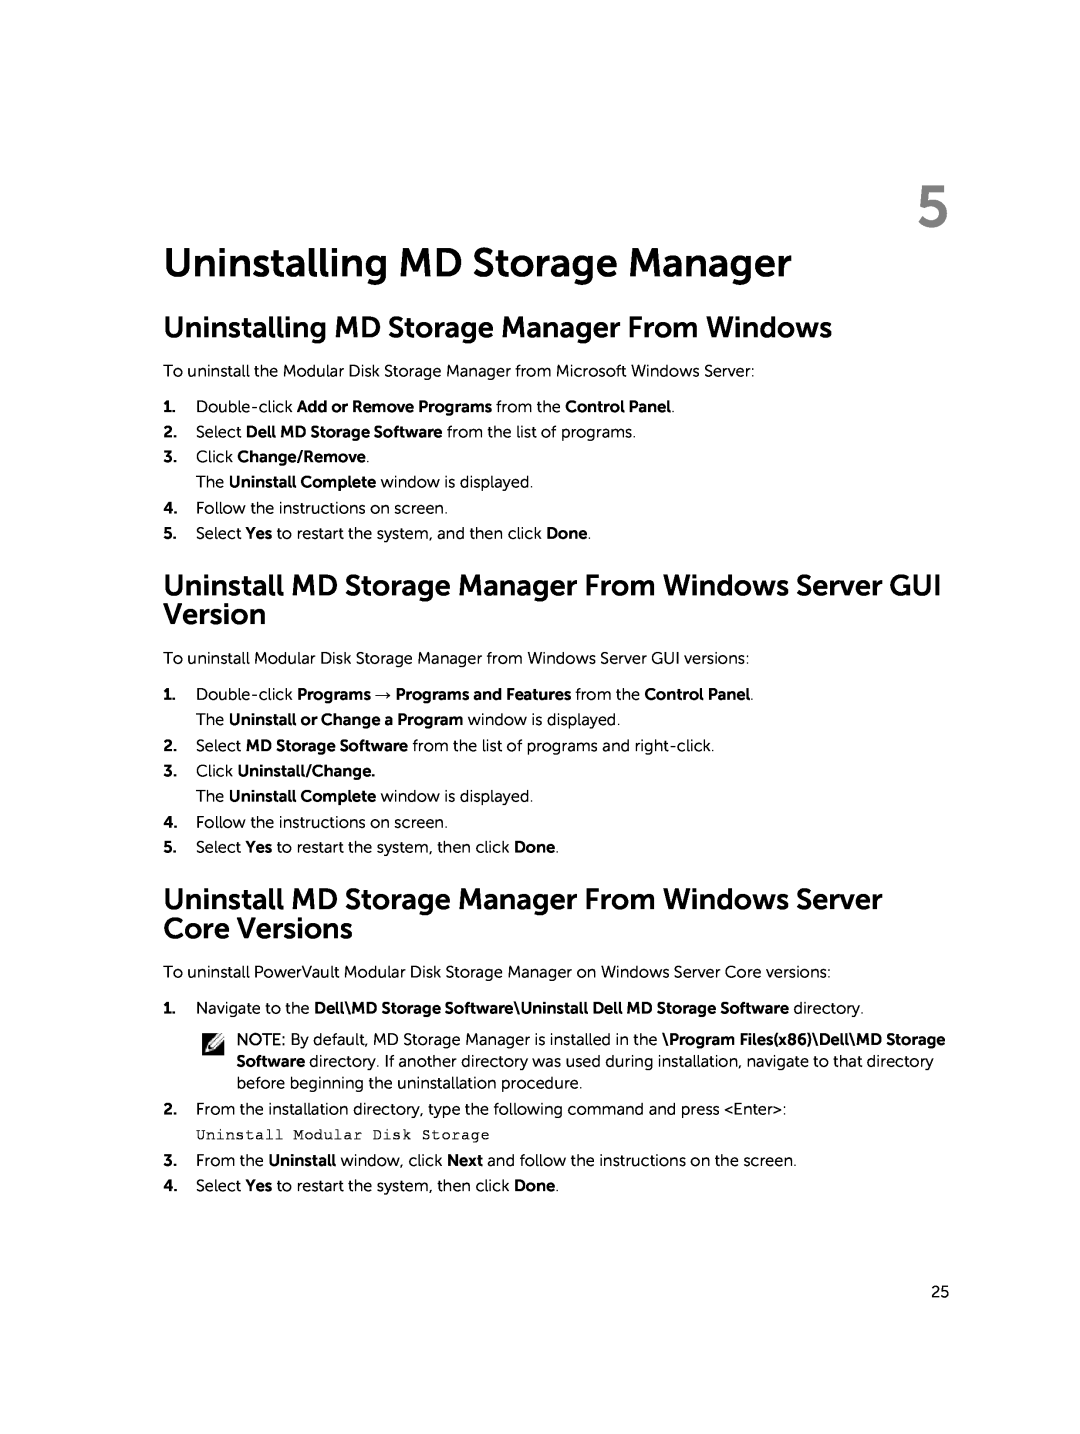 Dell MD3460 Uninstalling MD Storage Manager From Windows, Uninstall MD Storage Manager From Windows Server GUI Version 